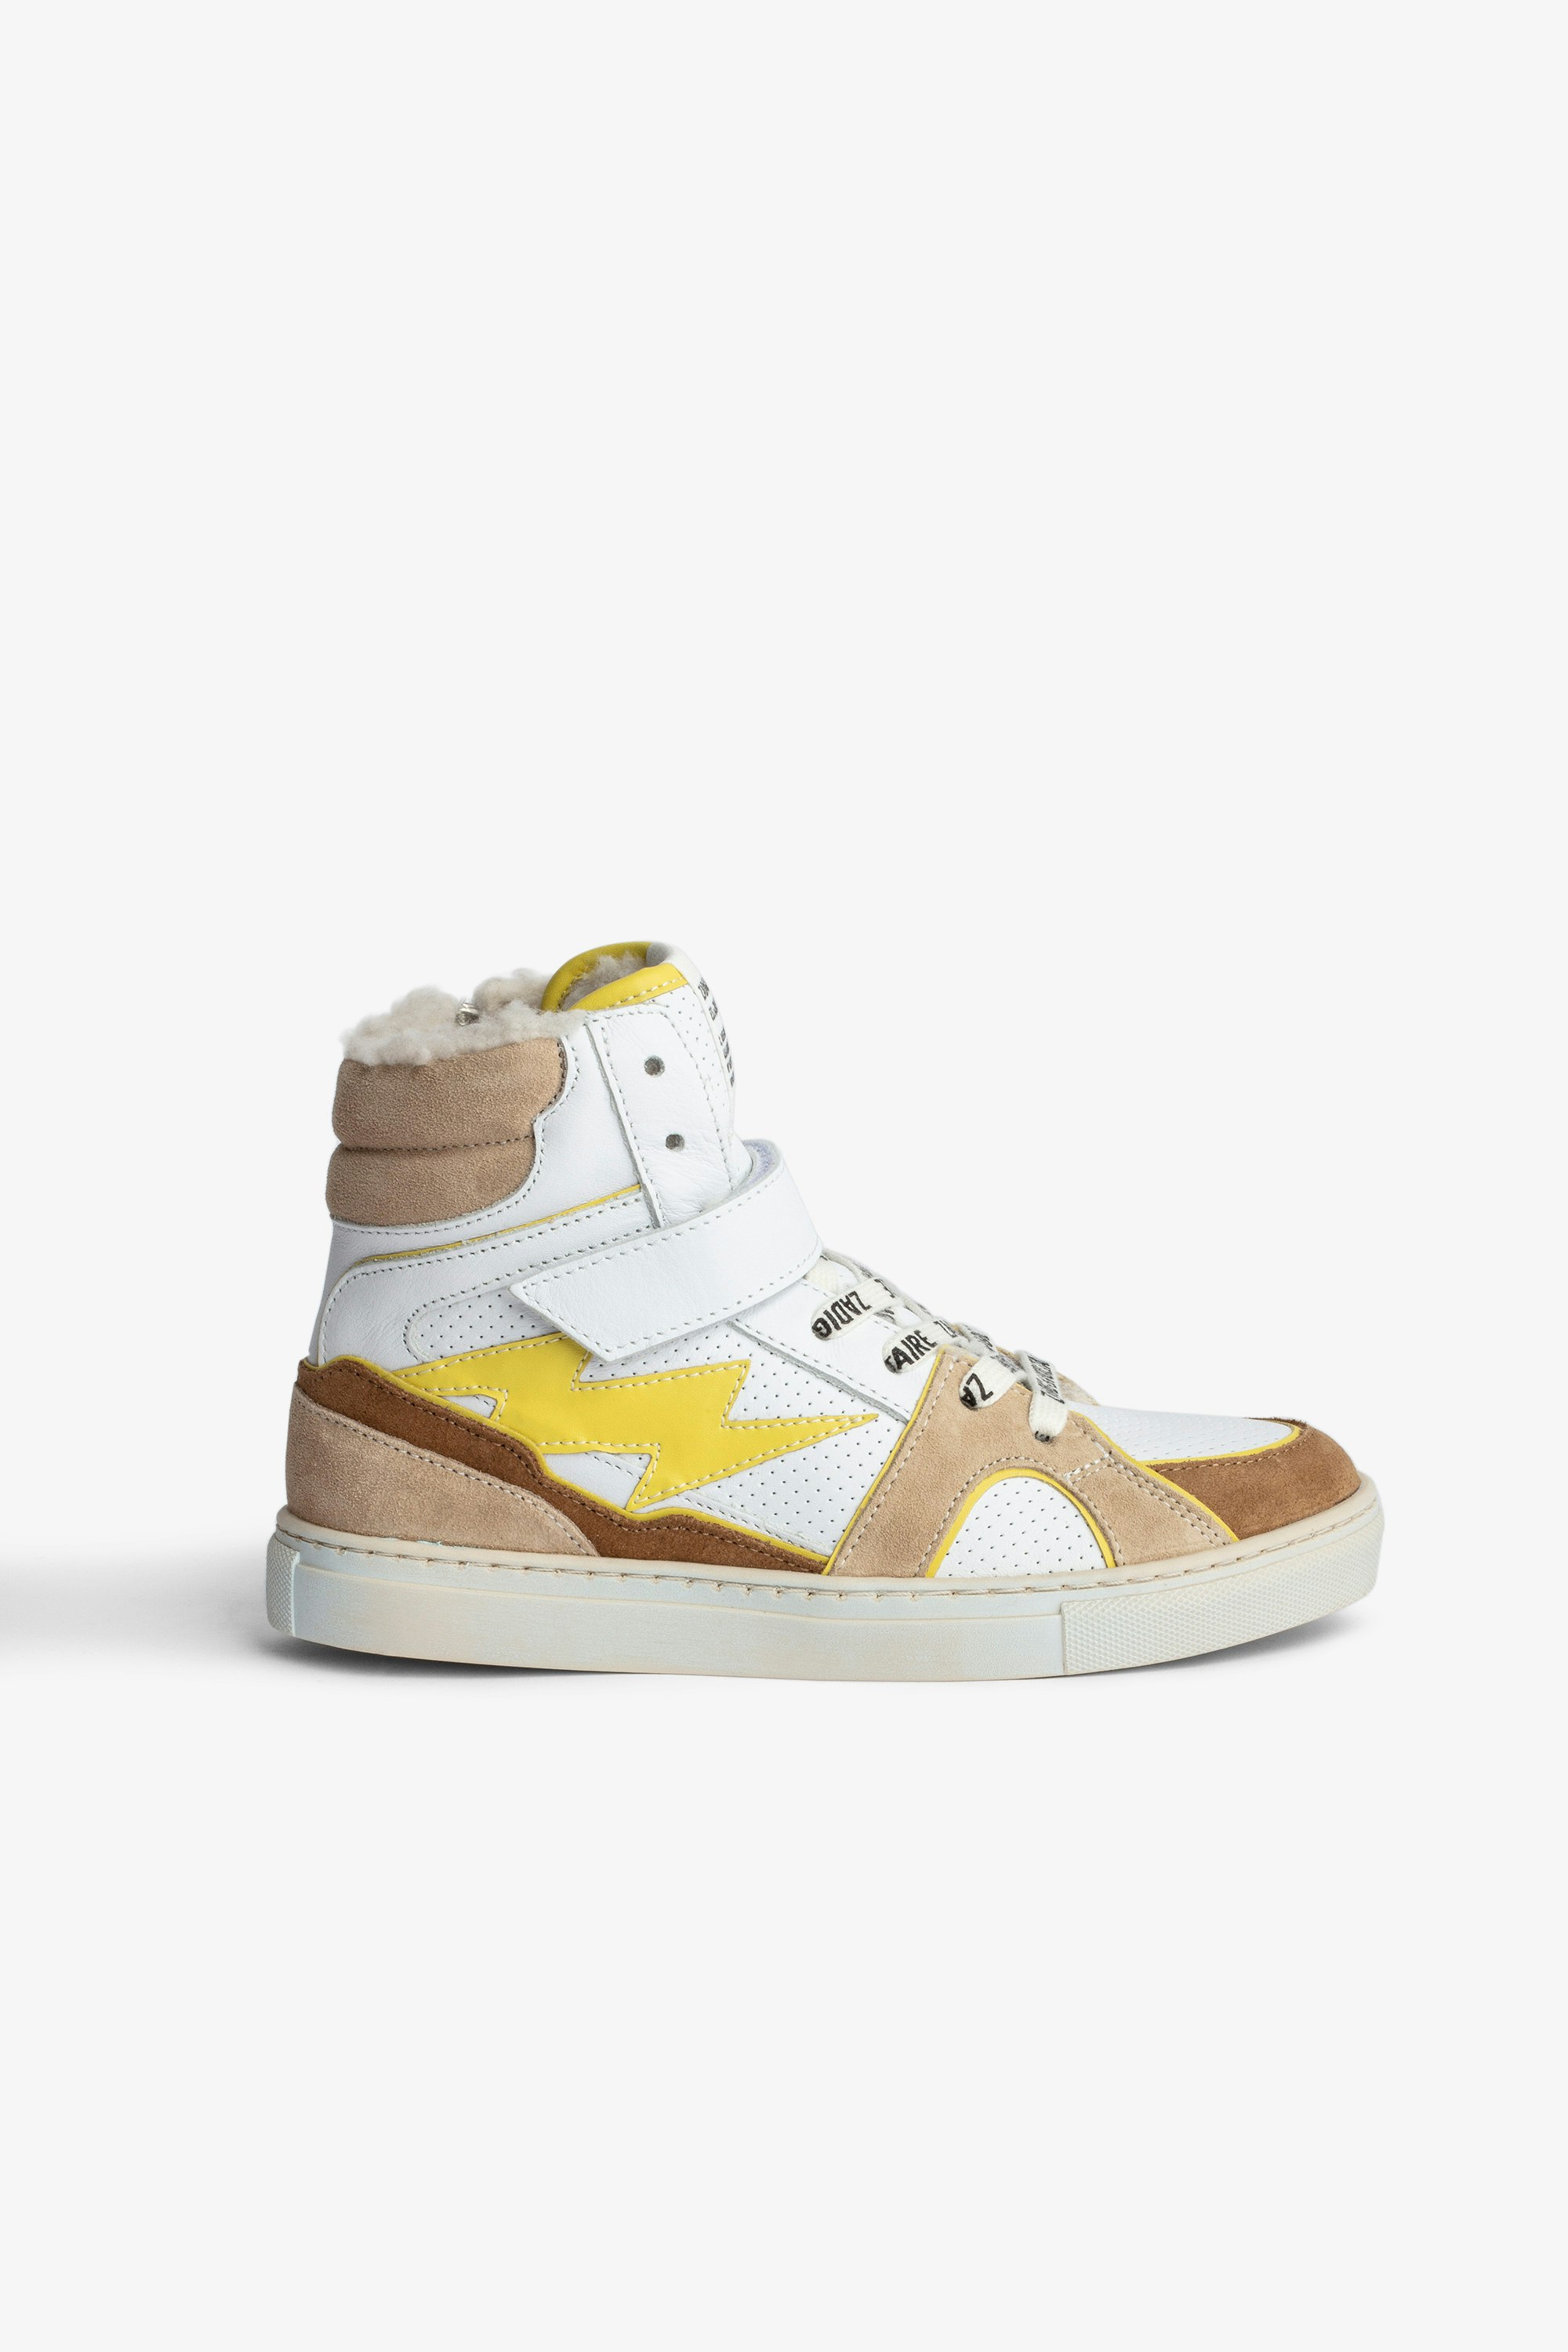 High Flash Children’s Sneakers Children’s white leather high-top sneakers with contrasting lightning flash patch 